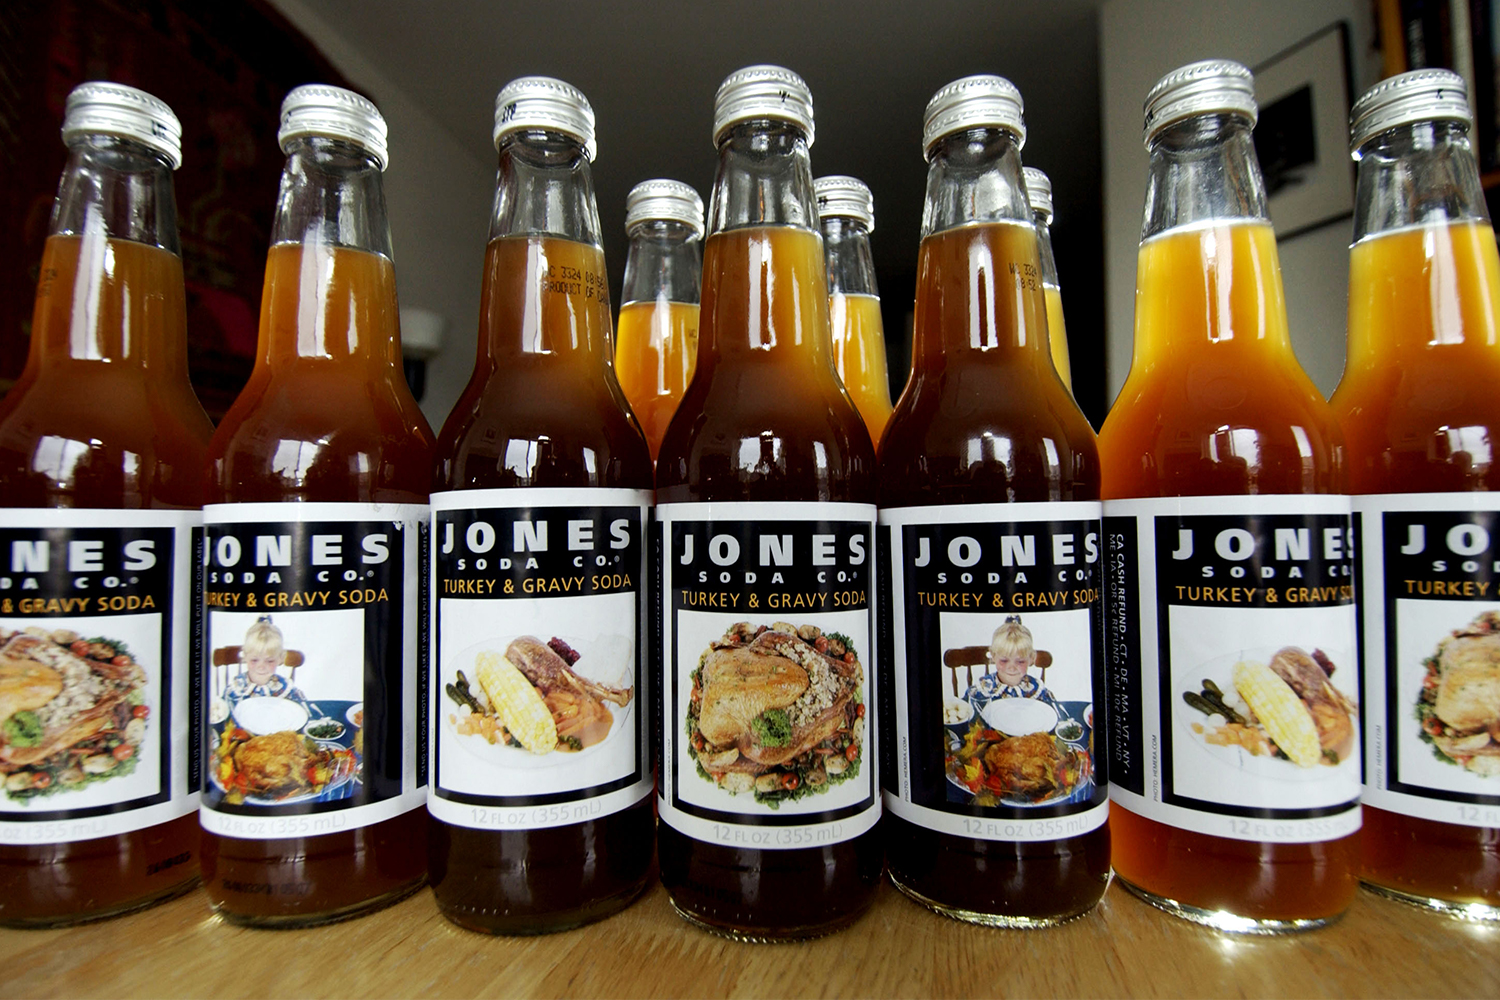 Bottles of Turkey & Gravy soda from Jones Soda Co. in 2003, the year the craft beverage brand first introduced the Thanksgiving flavor